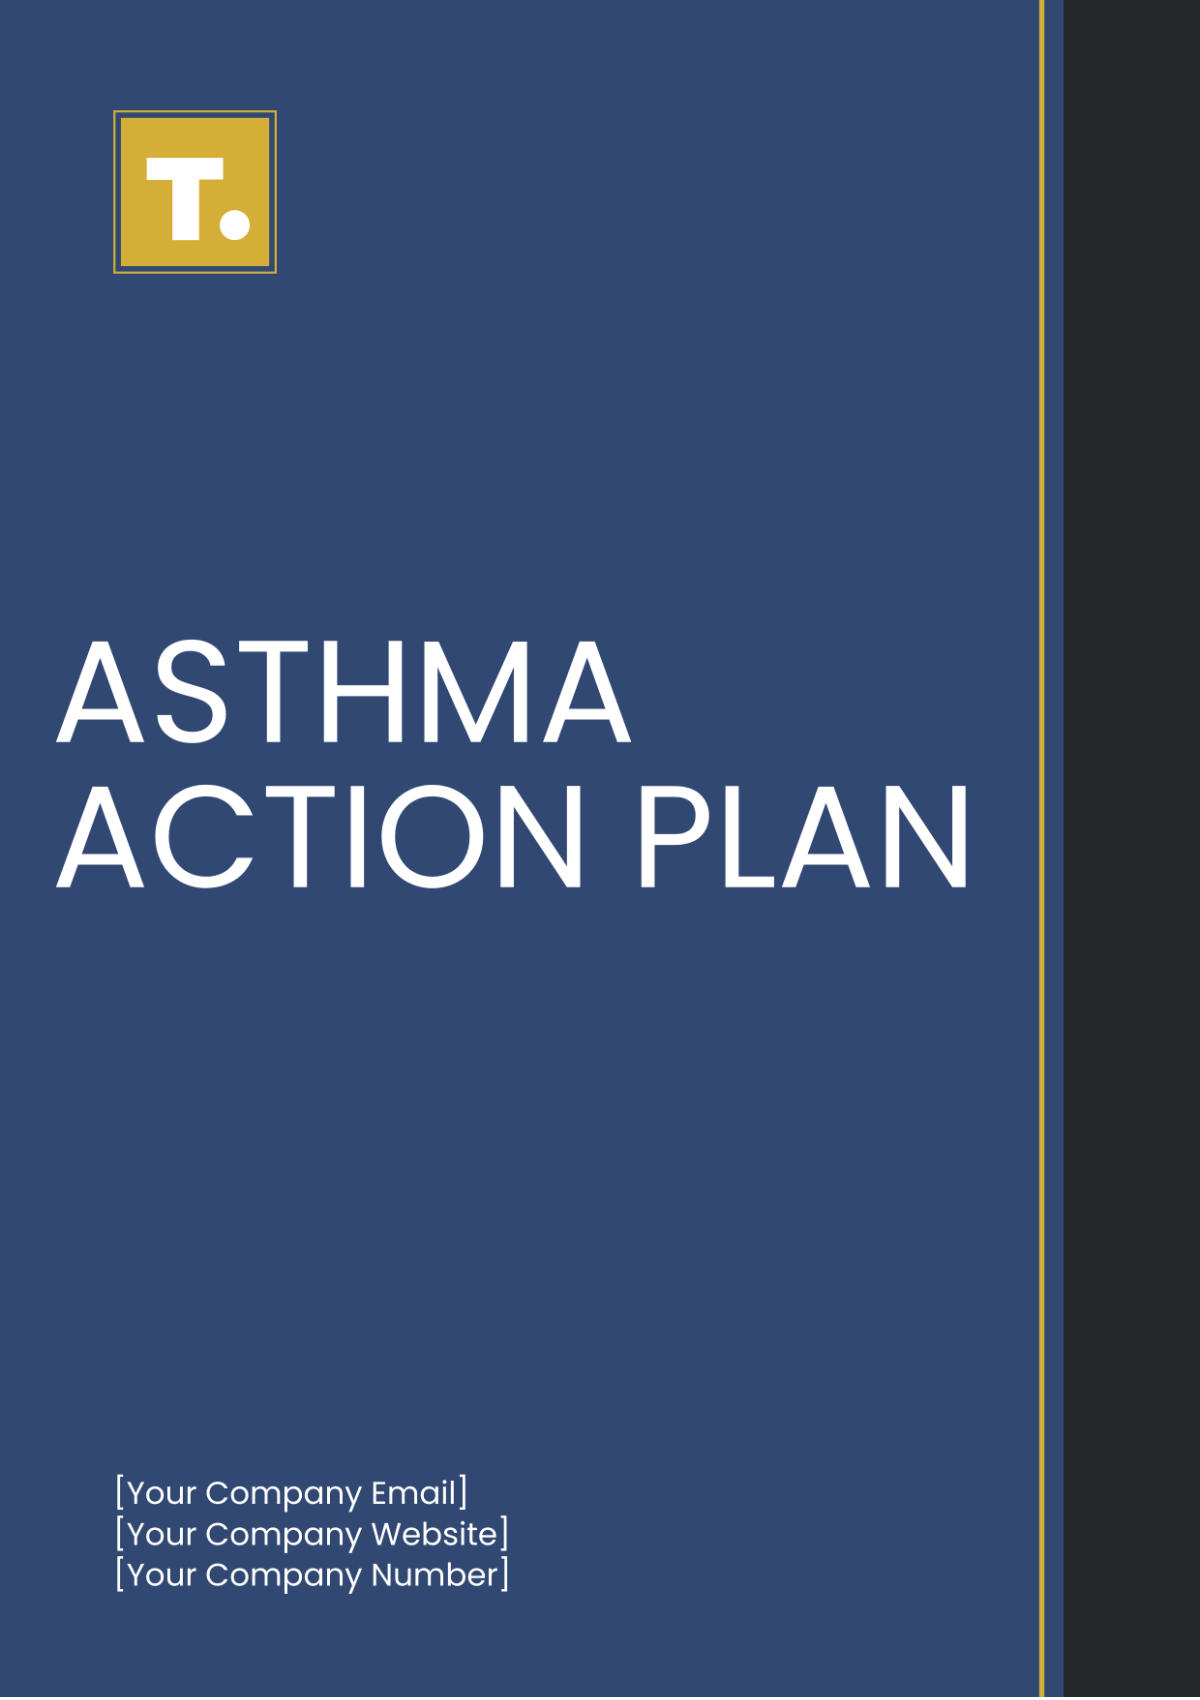 Free Asthma Action Plan Template